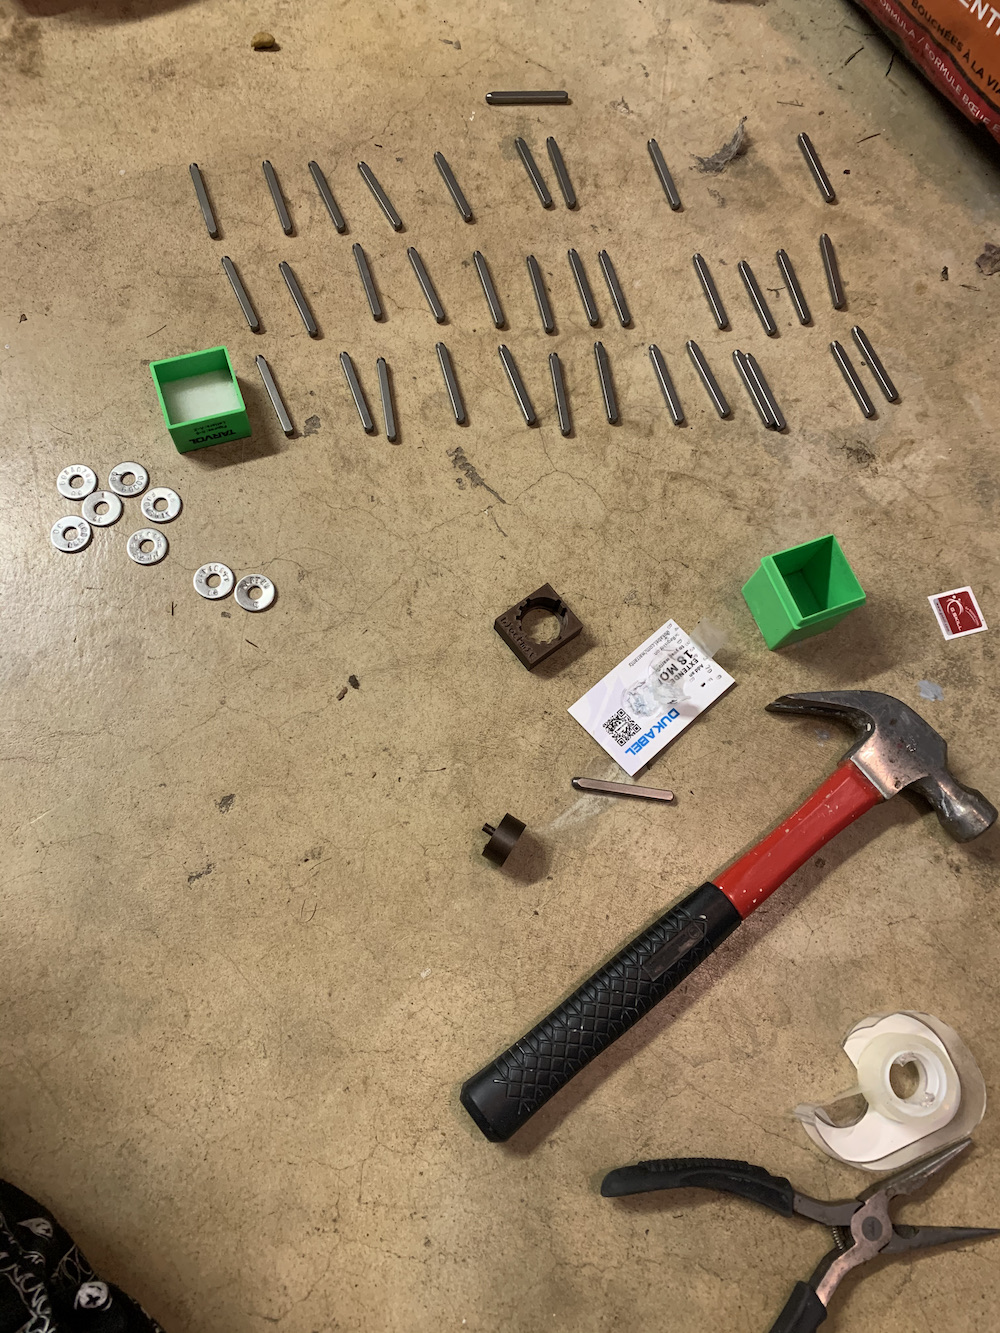 The tools and washers on my garage floor